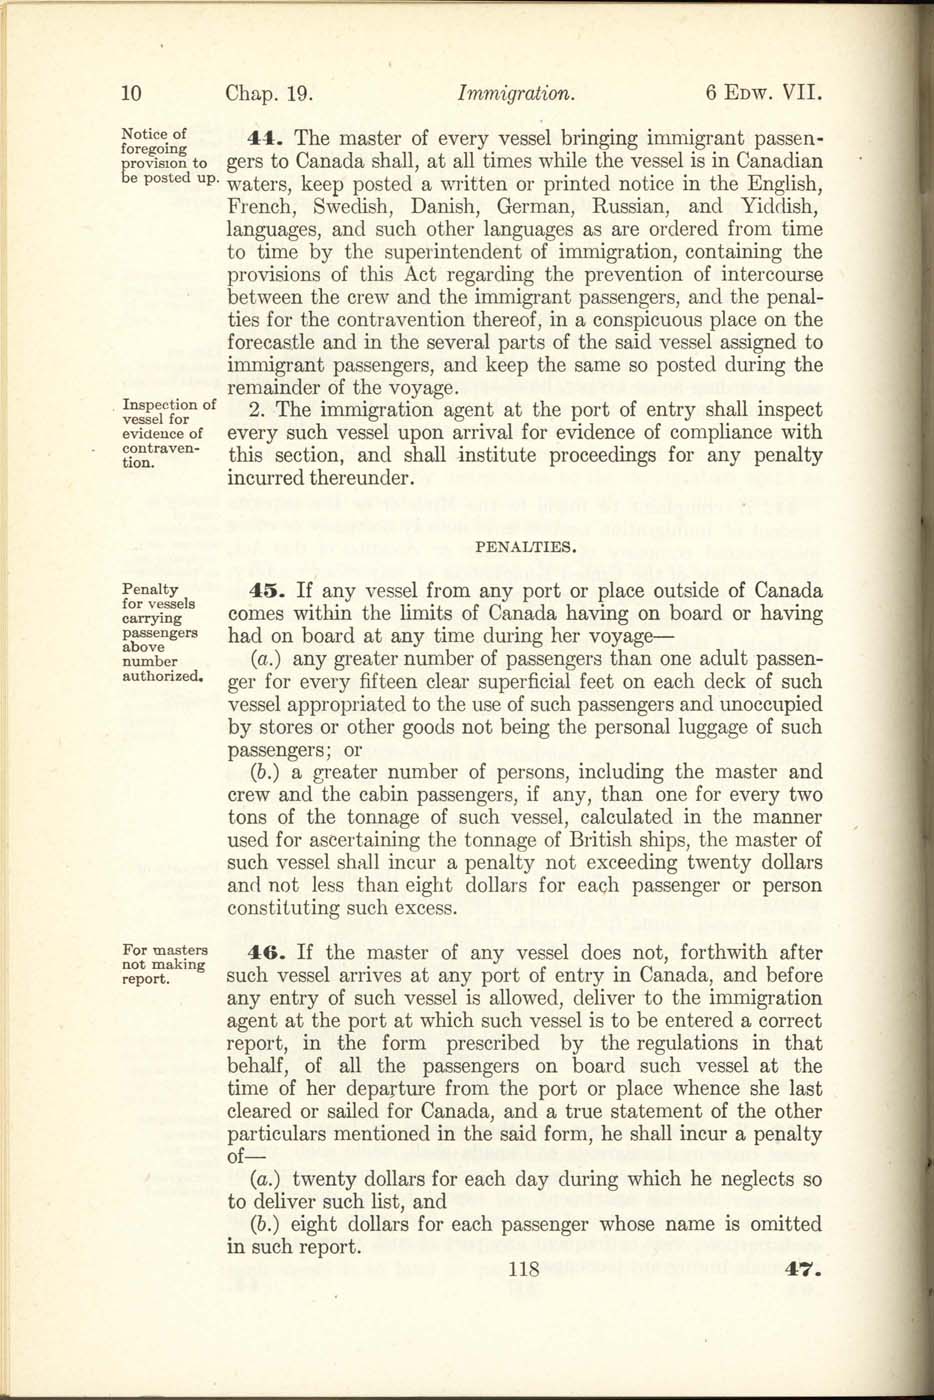 Chap. 19 Page 118 Immigration Act, 1906